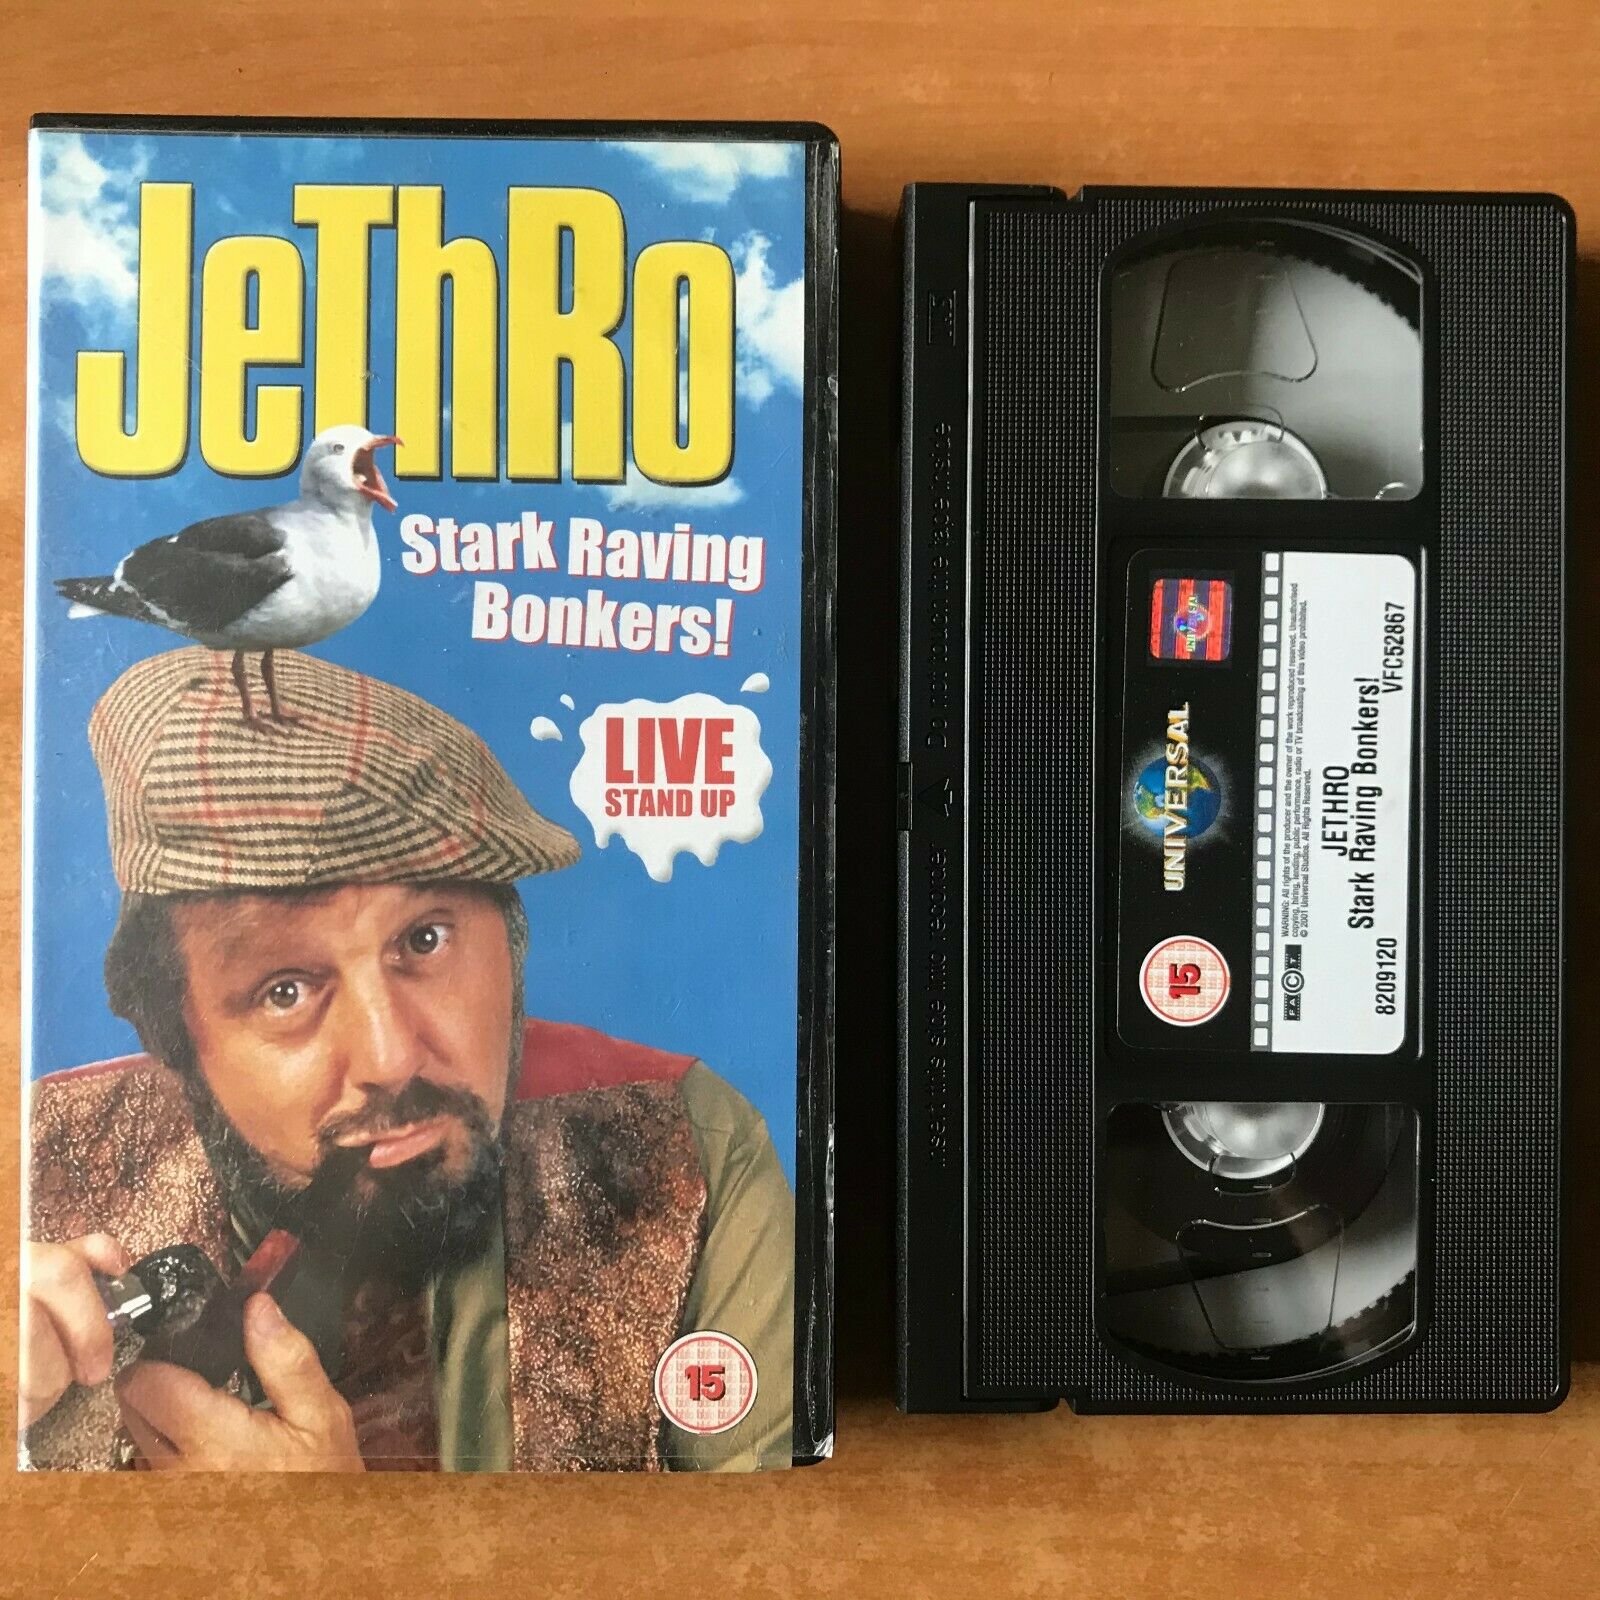 Jethro: Stark Raving Bonkers; [Live Stand Up] Comedy Sketches - Pal VHS-